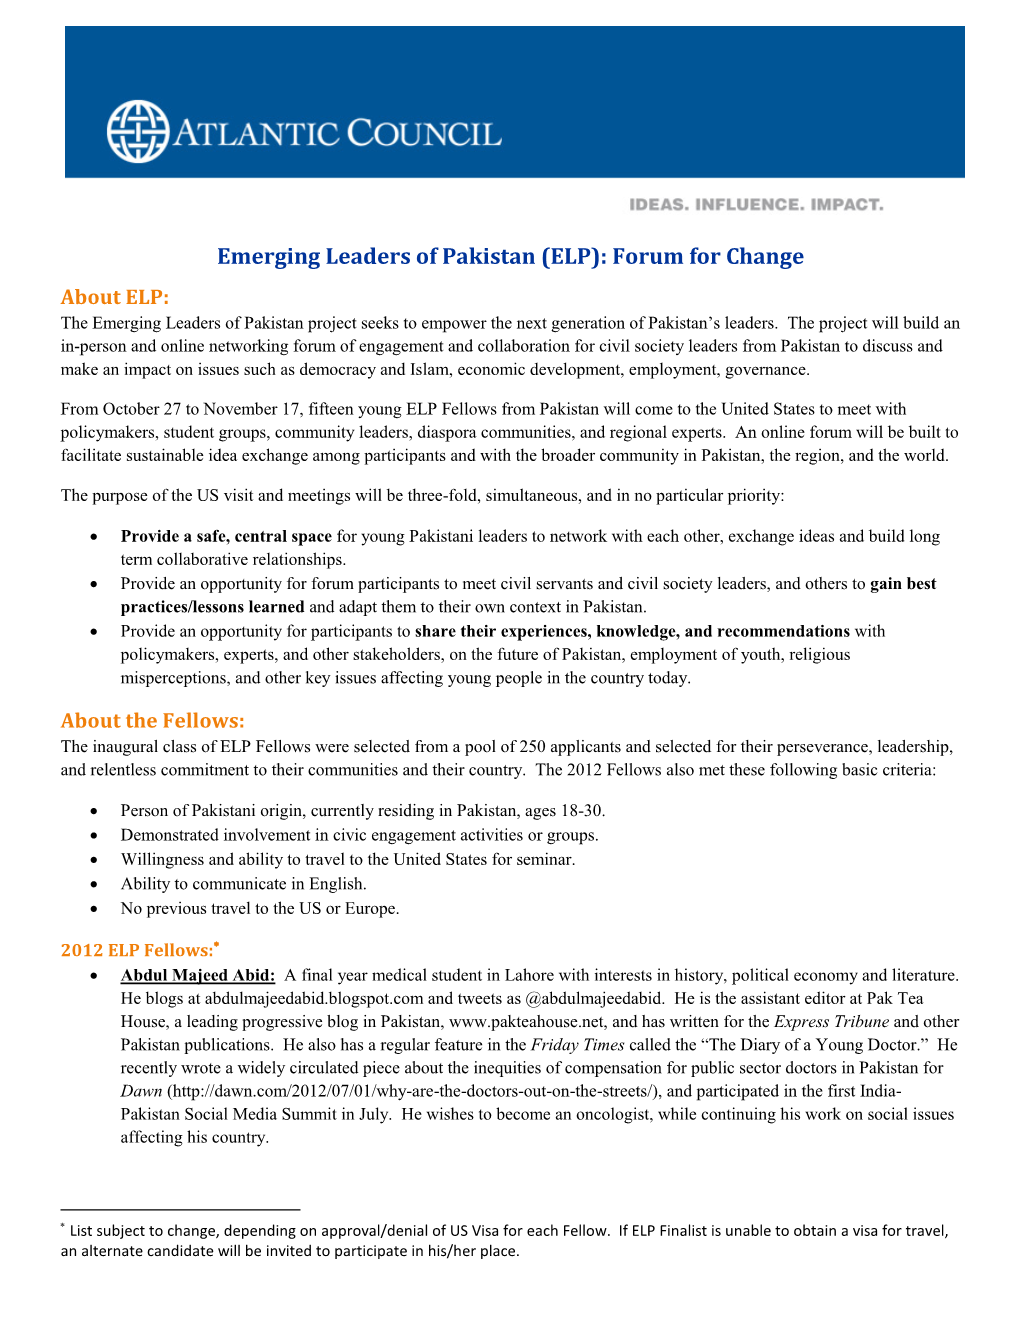 Emerging Leaders of Pakistan (ELP): Forum for Change About ELP: the Emerging Leaders of Pakistan Project Seeks to Empower the Next Generation of Pakistan’S Leaders